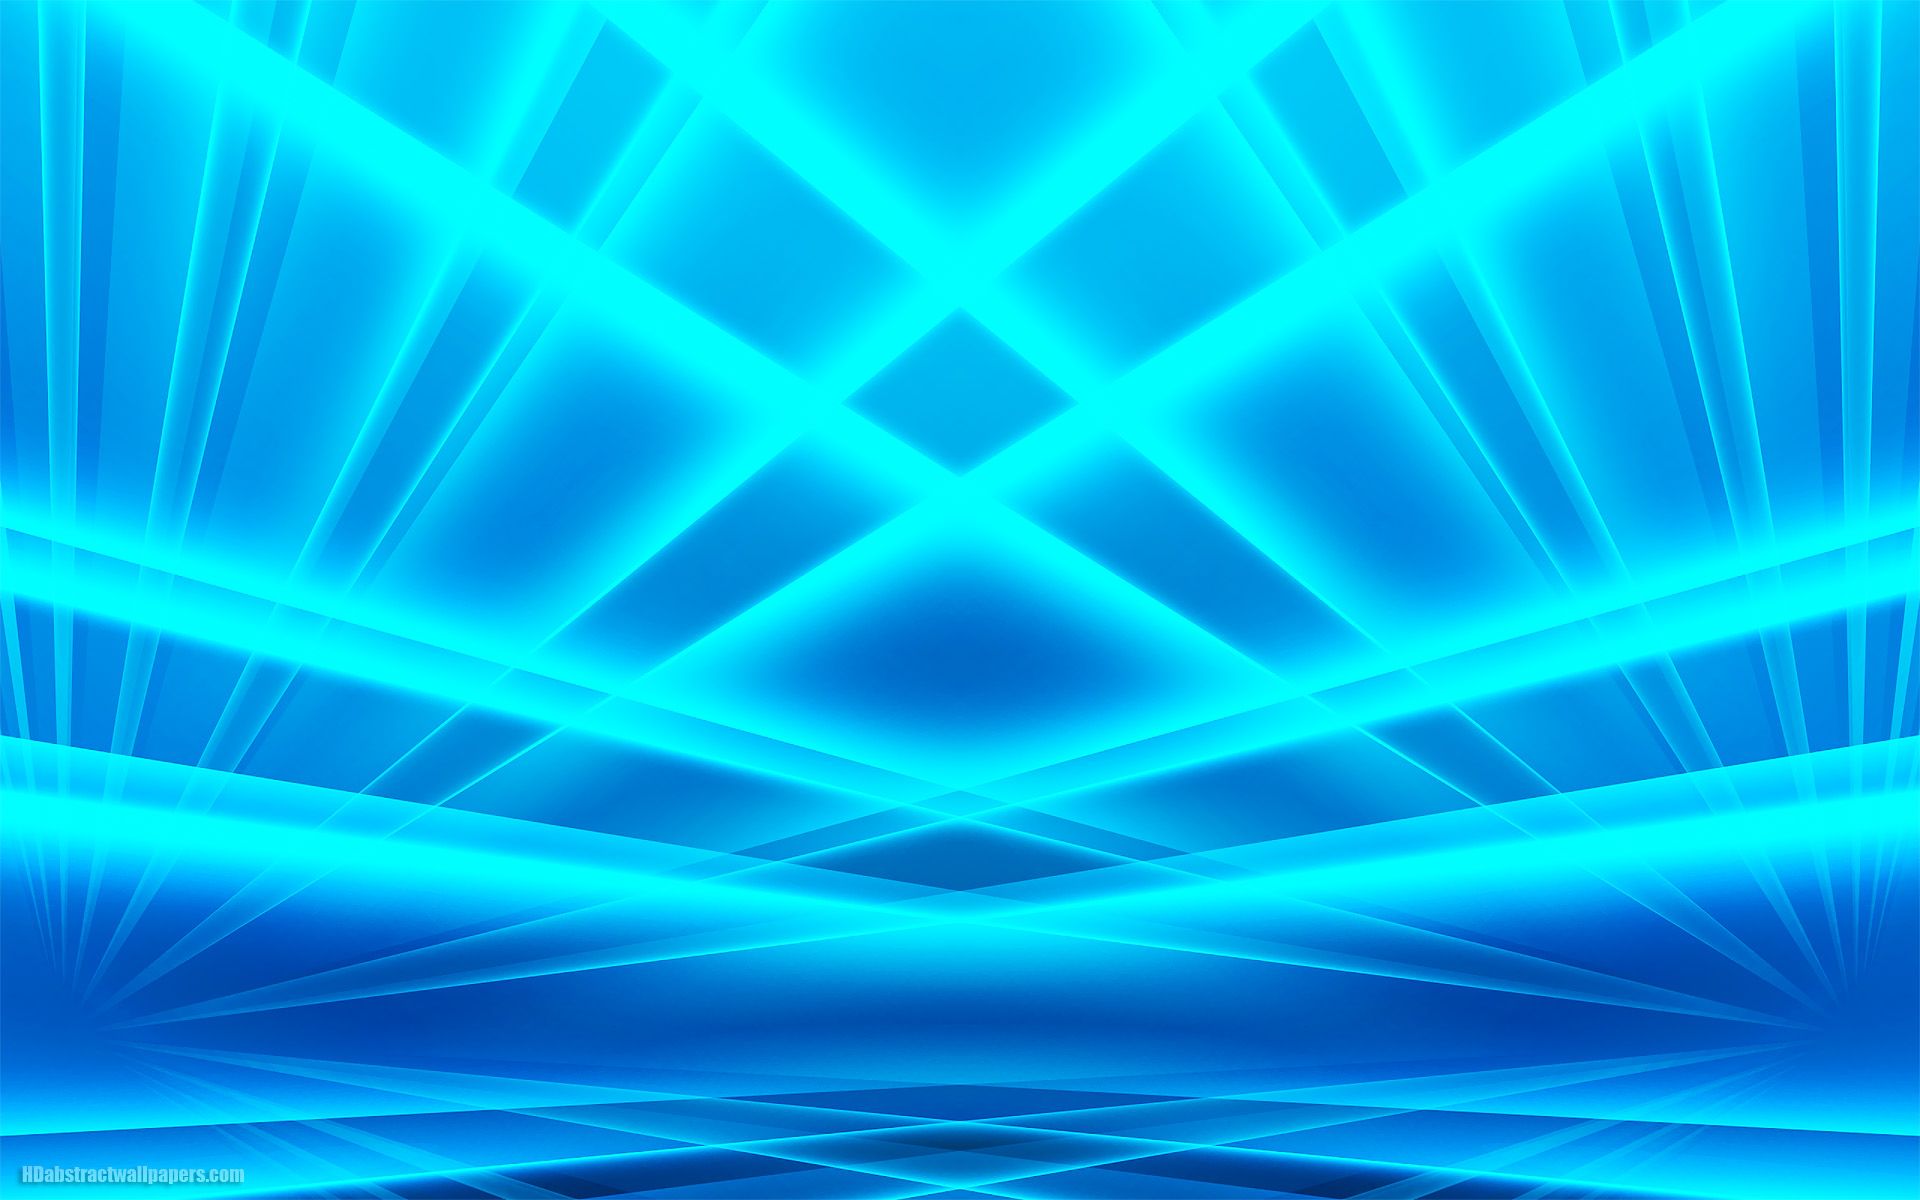 25 Beautiful abstract blue wallpapers | HD Abstract Wallpapers